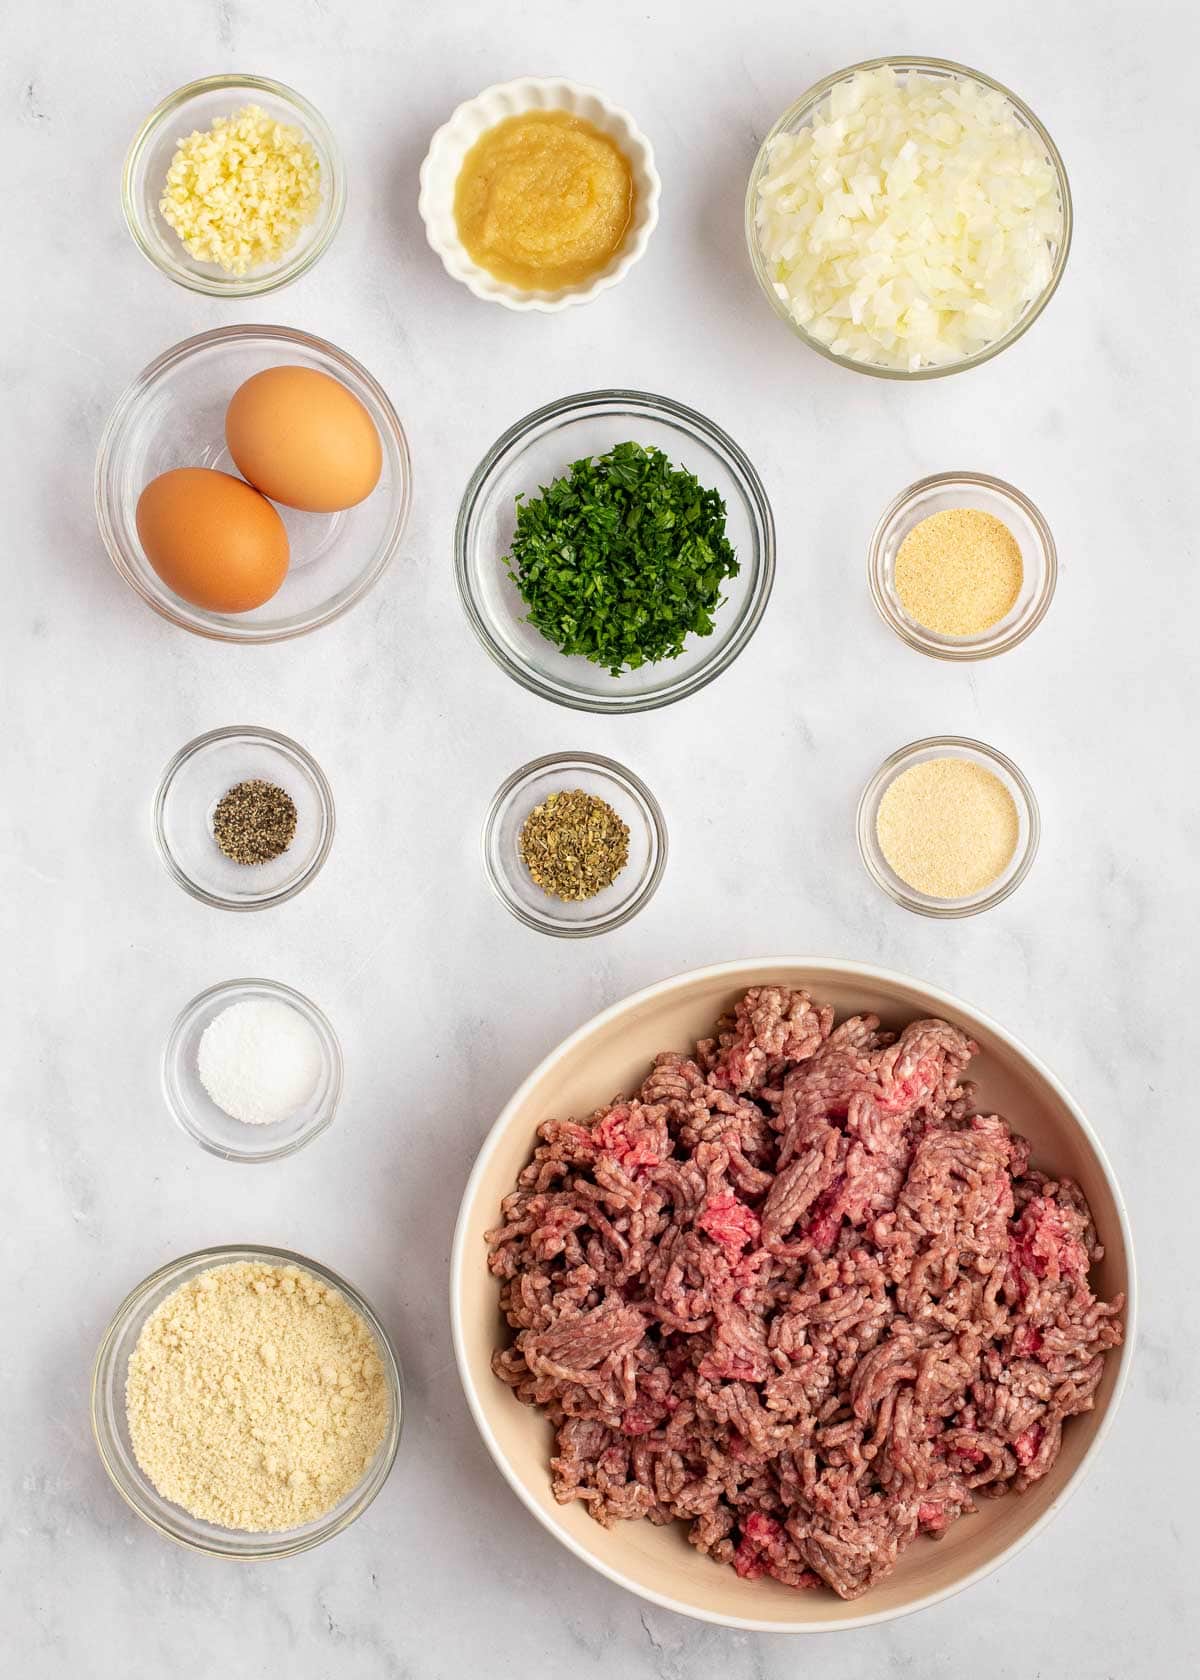 Overhead view of the ingredients needed for the keto meatloaf: a bowl of ground beef, a bowl of onions, a bowl of eggs, a bowl of garlic, a bowl of applesauce, a bowl of onion powder, a bowl of garlic powder, a bowl of ground oregano, a bowl of salt, a bowl of pepper, and a bowl of almond flour